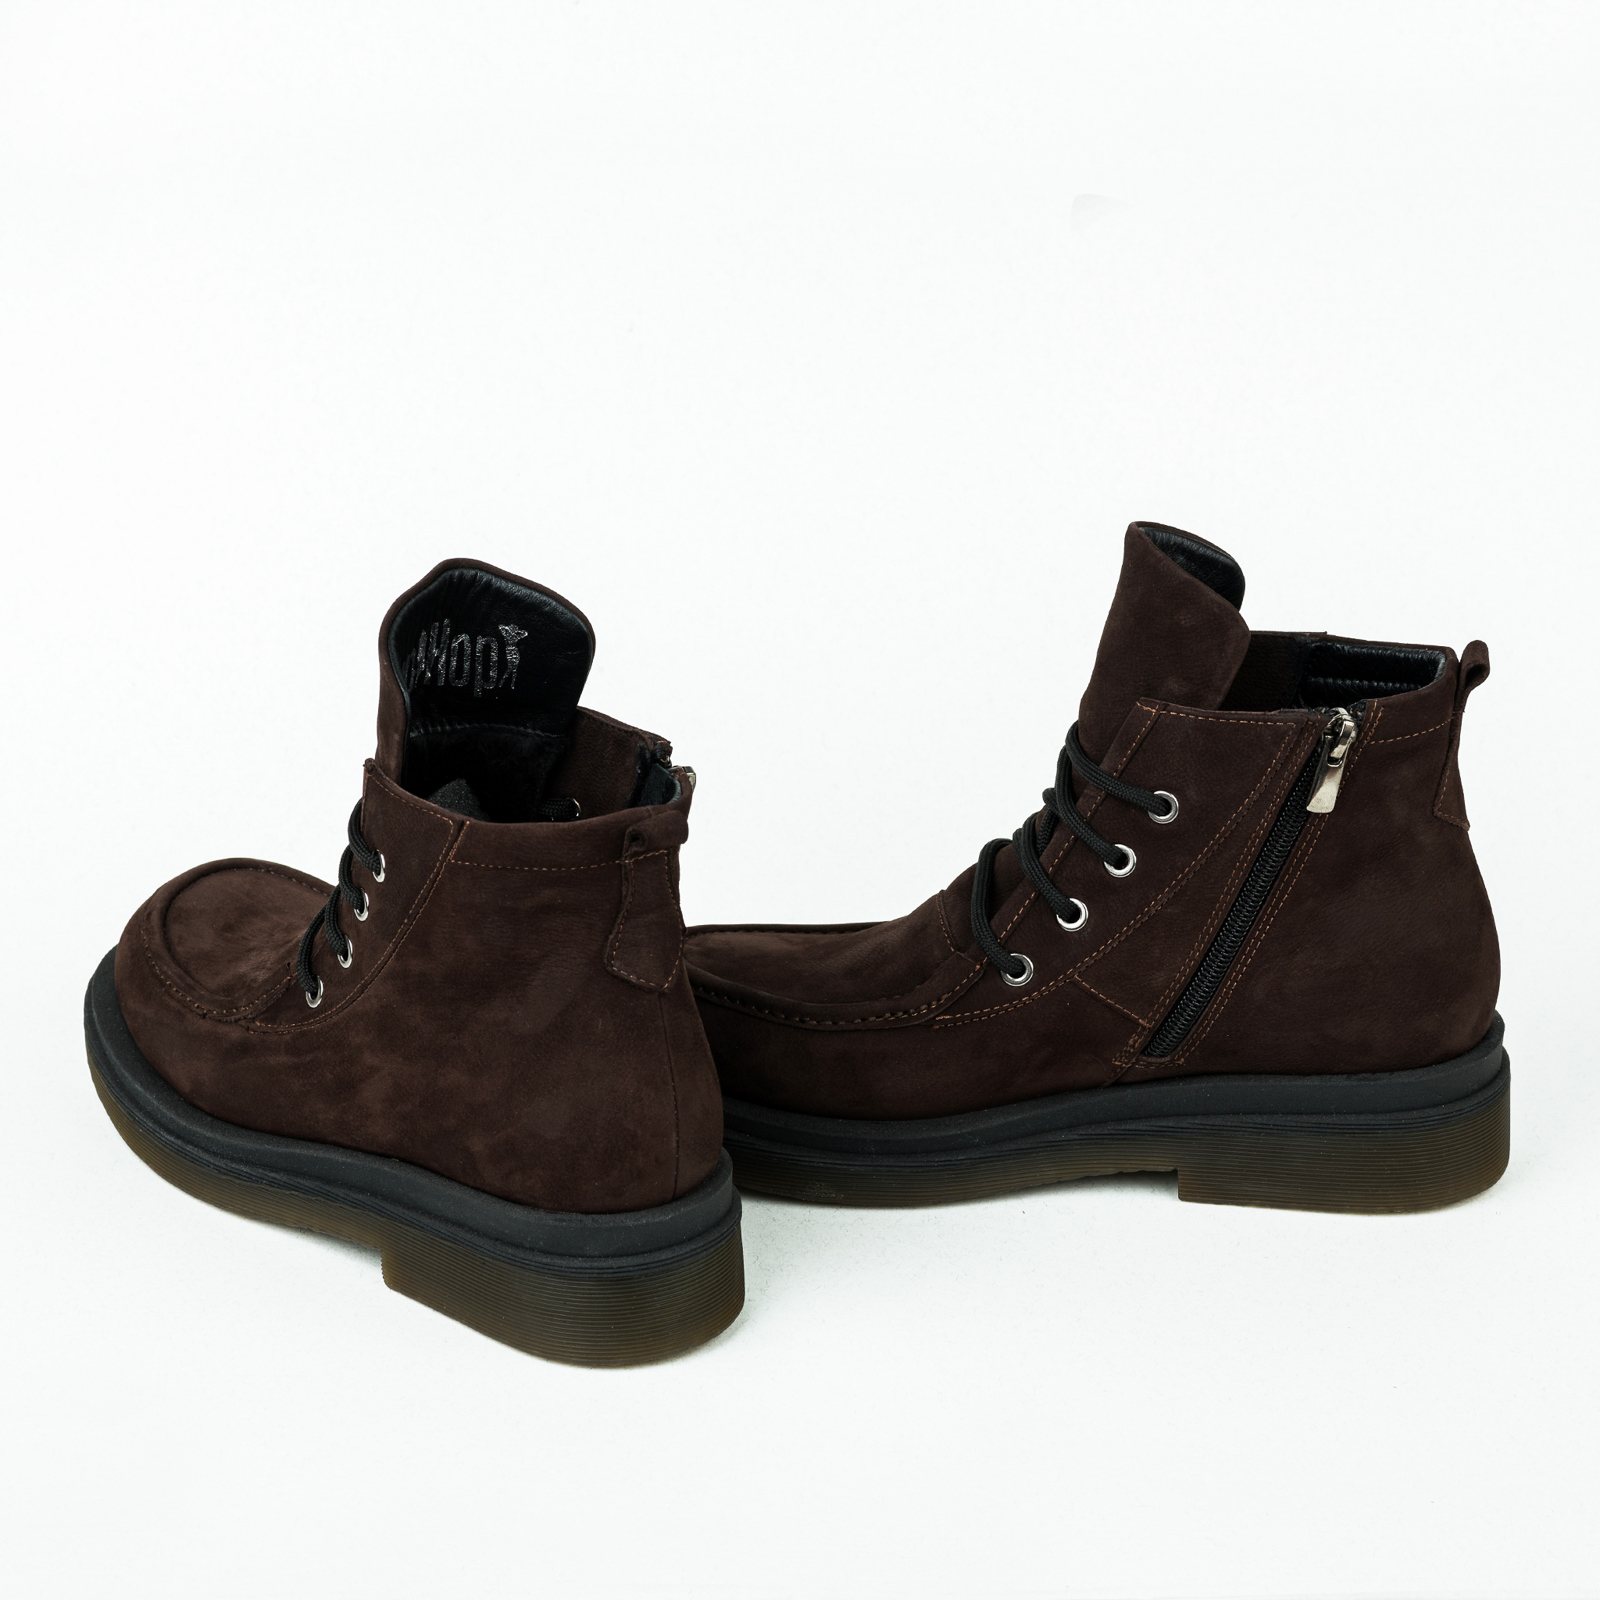 Leather ankle boots B057 - BROWN